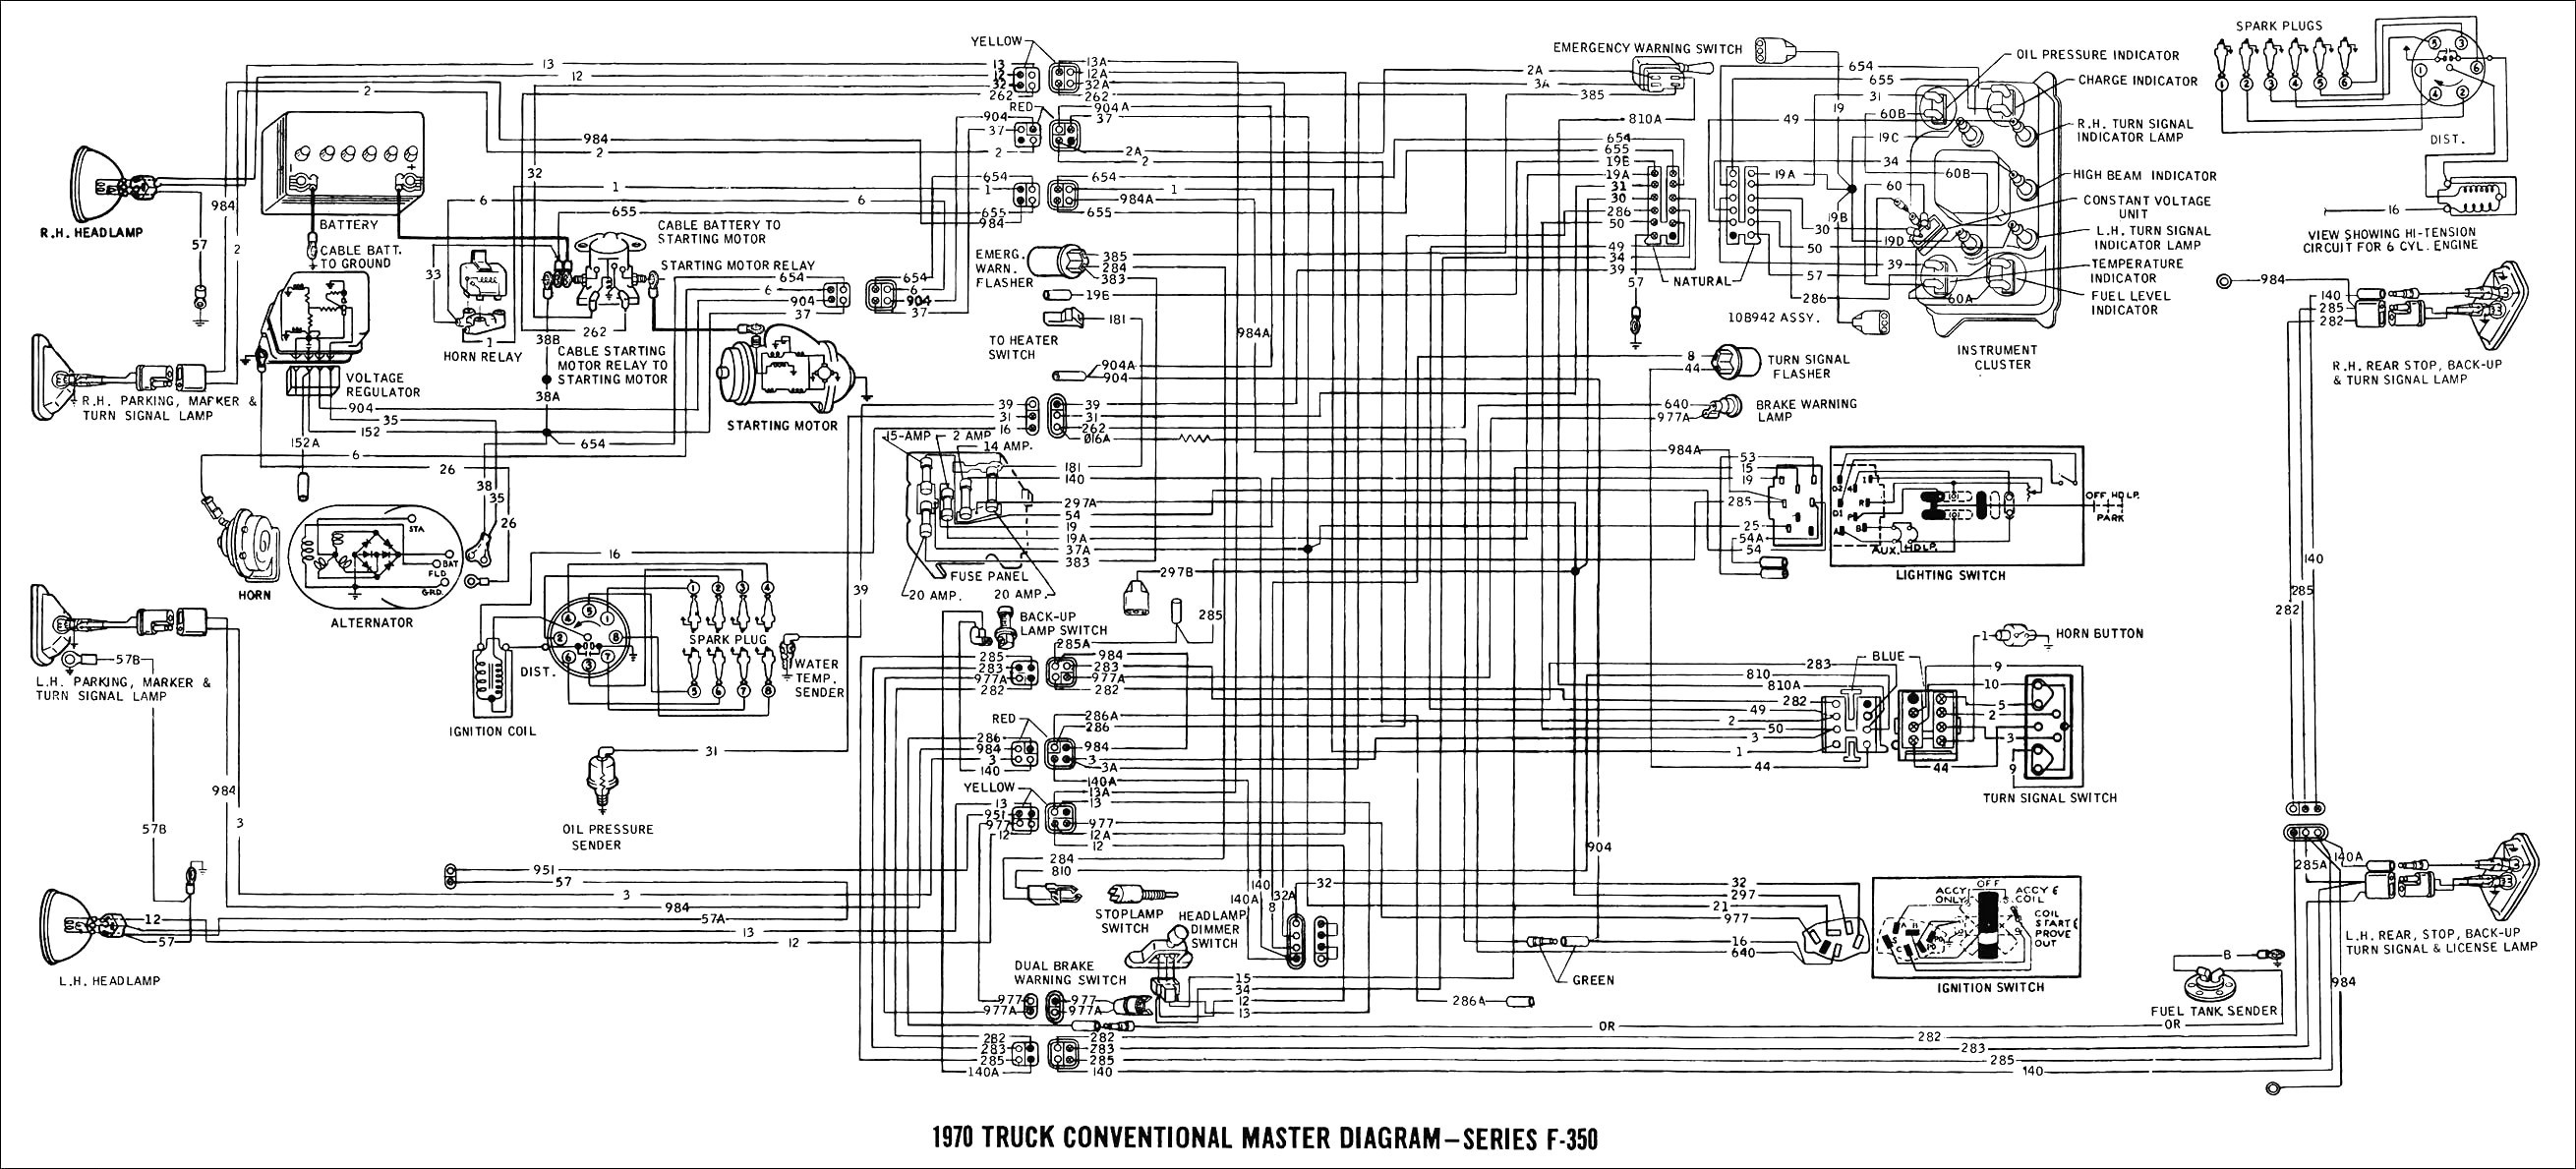 Ford Starter solenoid Wiring Diagram 2001 ford Ranger Starter Wiring Diagram Inspirational 1999 ford Of Ford Starter solenoid Wiring Diagram